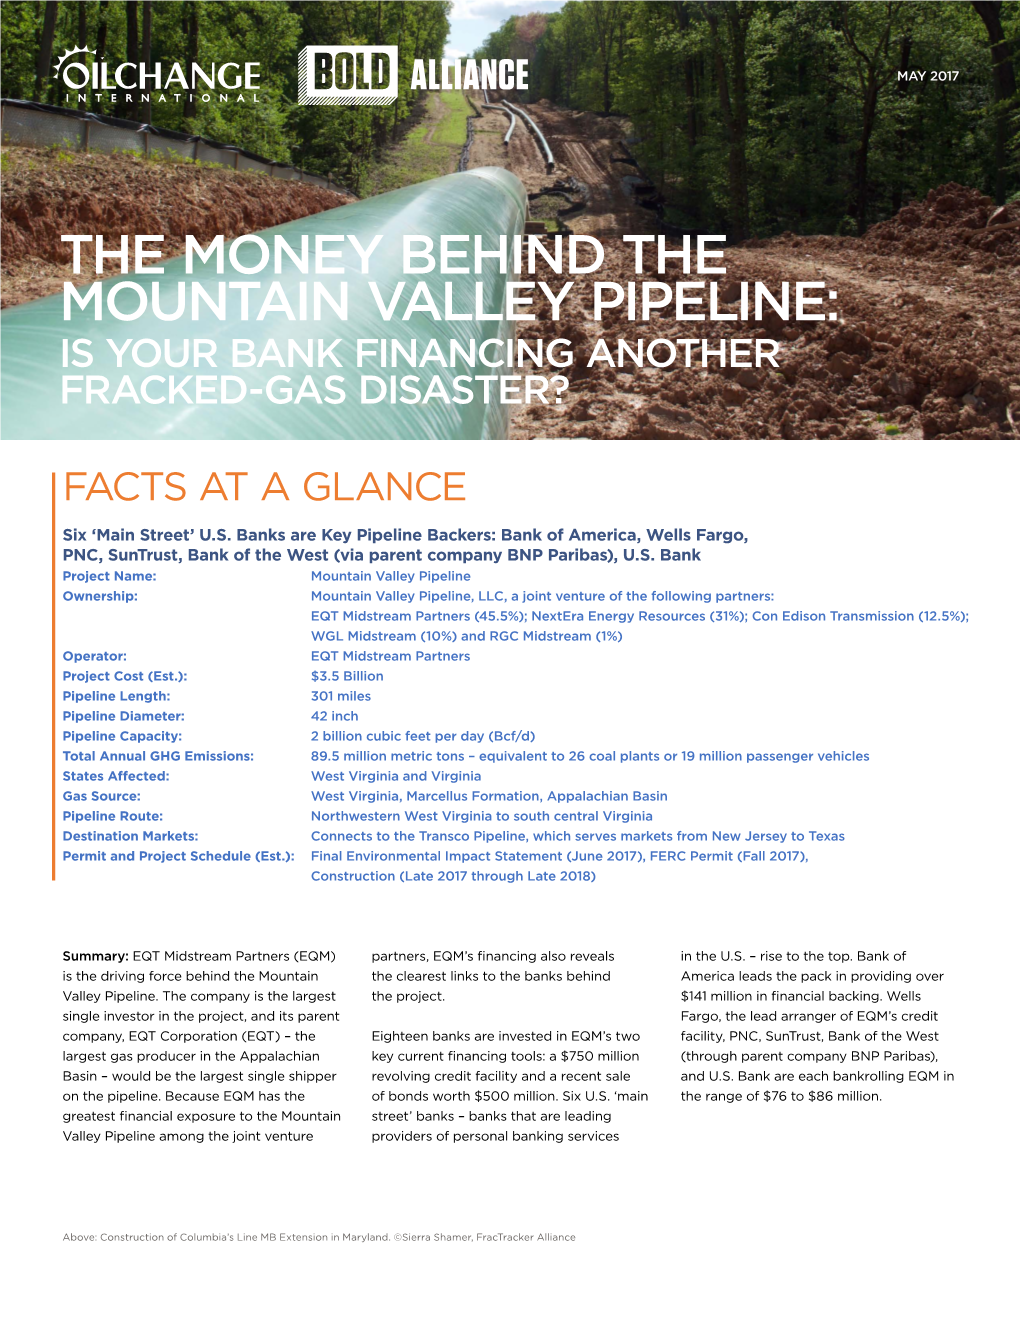 The Money Behind the Mountain Valley Pipeline: Is Your Bank Financing Another Fracked-Gas Disaster?